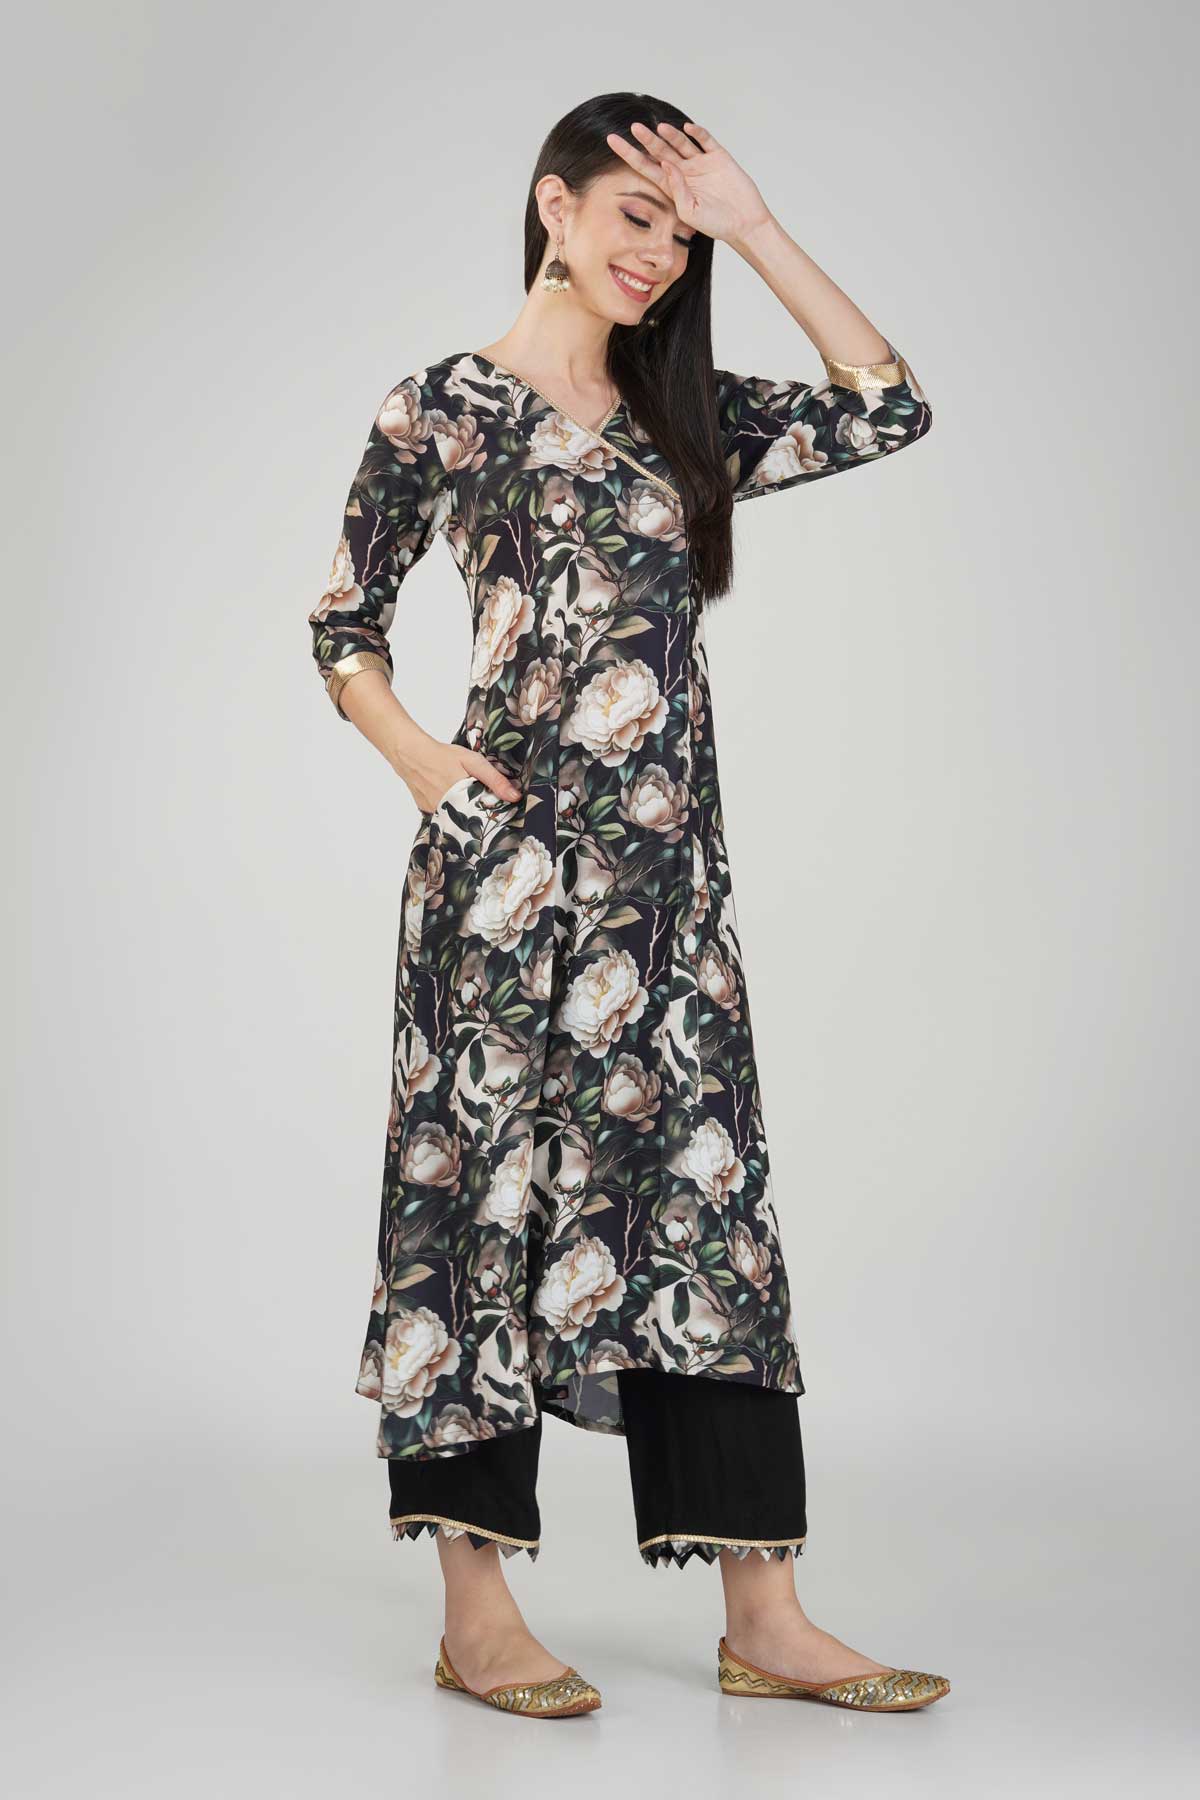 Black Floral Kurti with Chic Wide-Legged Pants